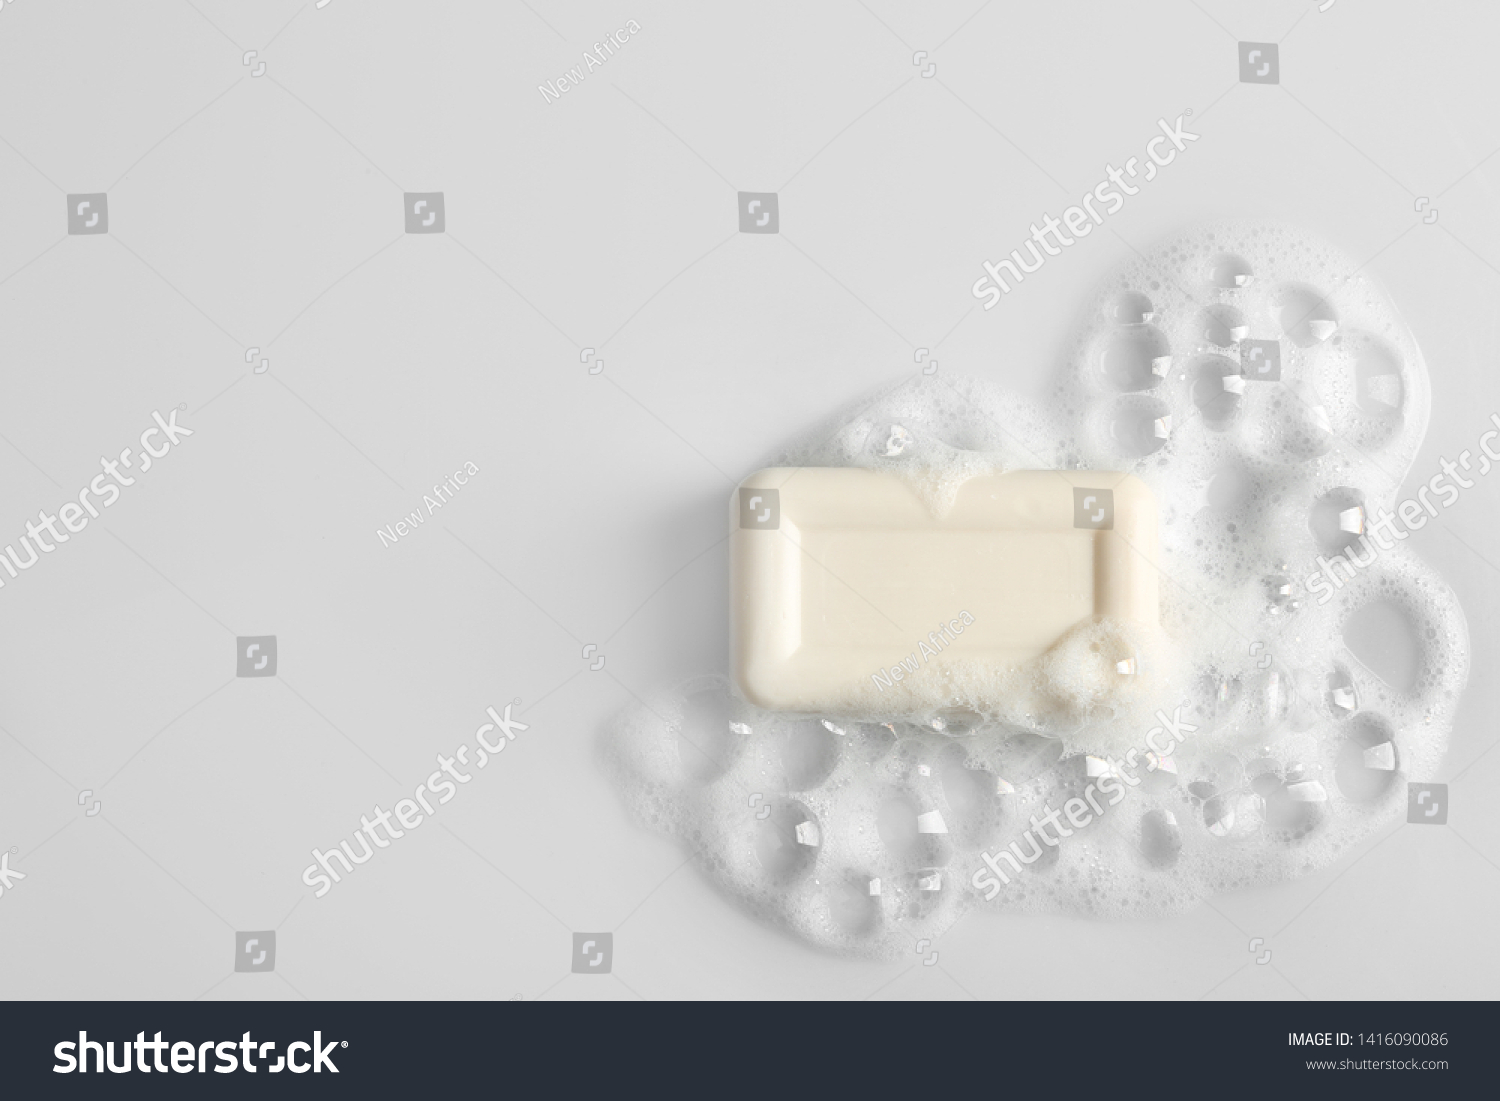 Soap bar and foam on white background, top view. Mockup for design #1416090086